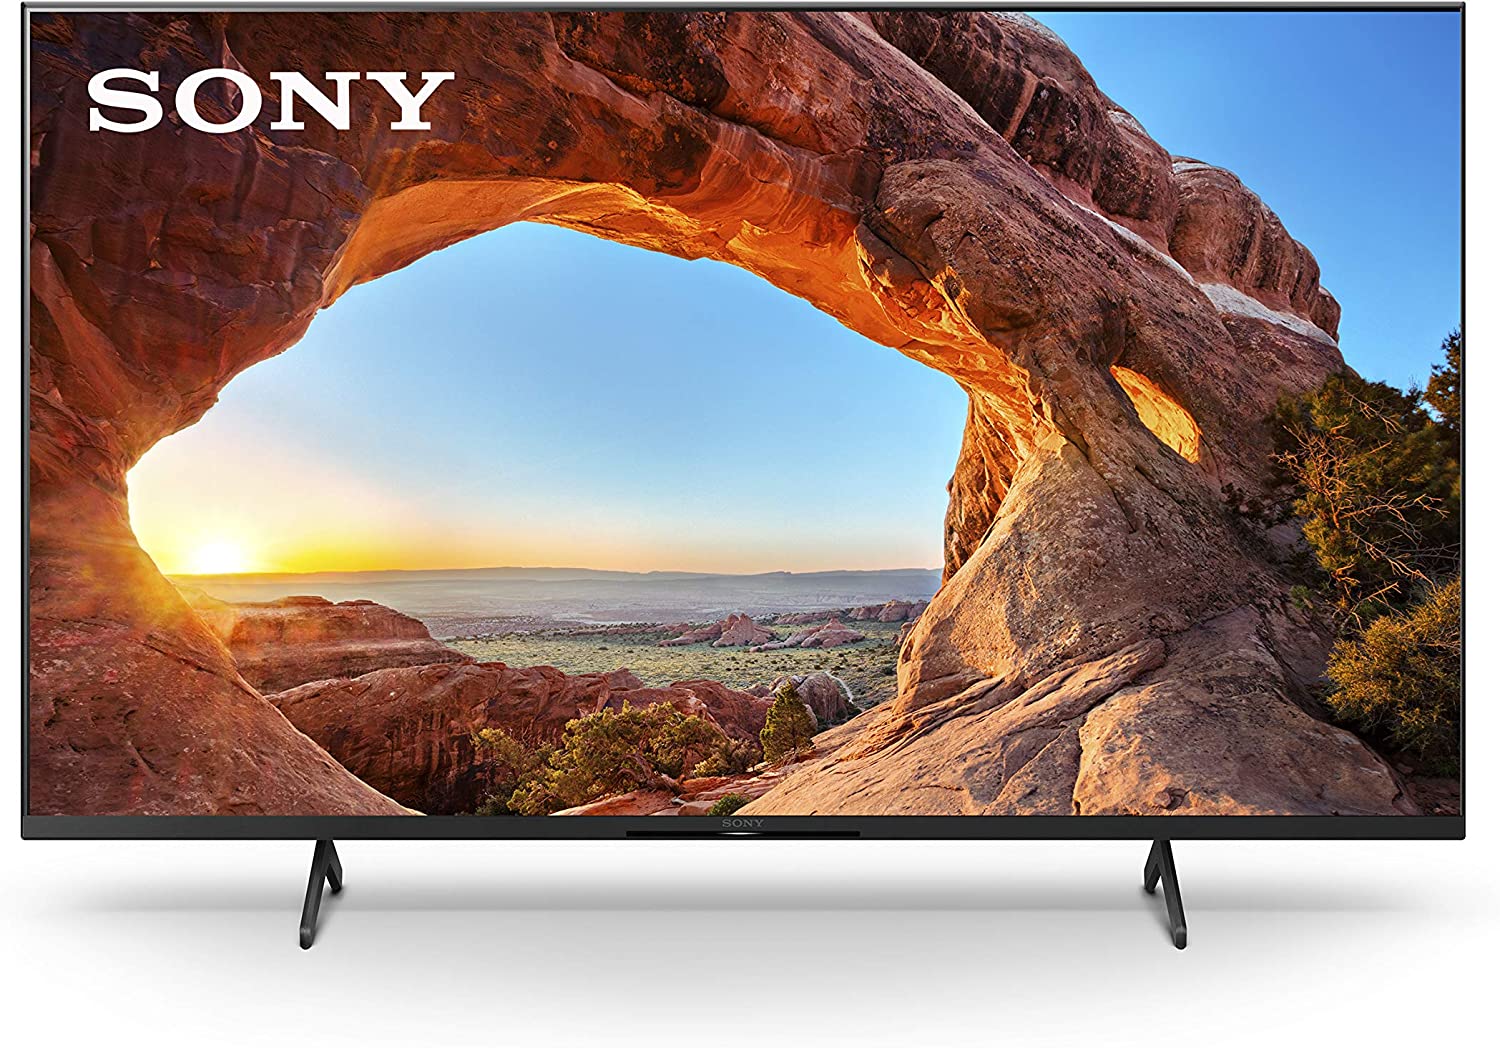 Sony X85J 75 Inch TV: 4K Ultra HD LED Smart Google TV with Native 120HZ Refresh Rate, Dolby Vision HDR, and Alexa Compatibility KD75X85J- 2021 Model, Black